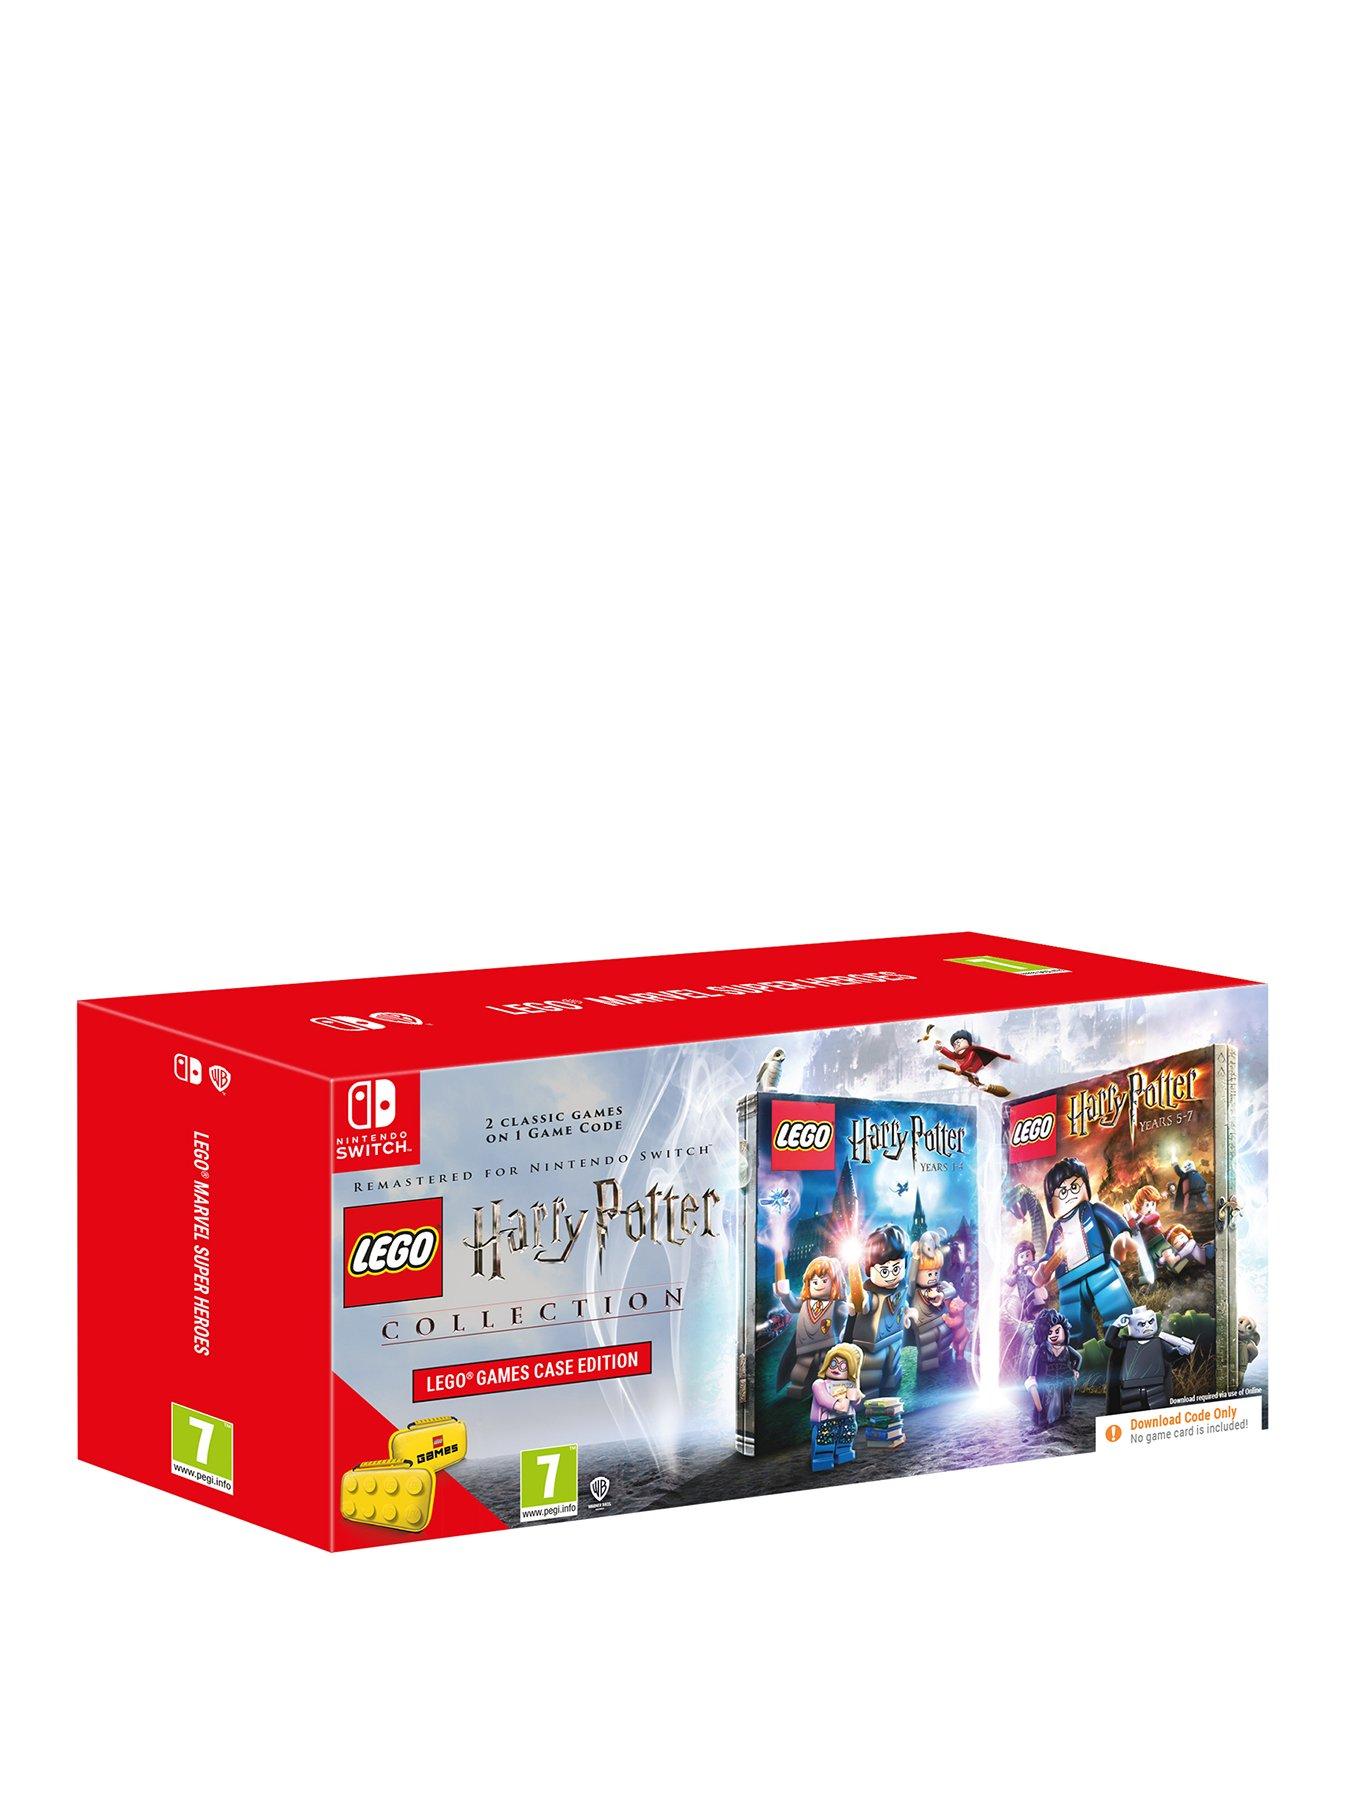 LEGO Harry Potter Collection Standard Edition Nintendo Switch